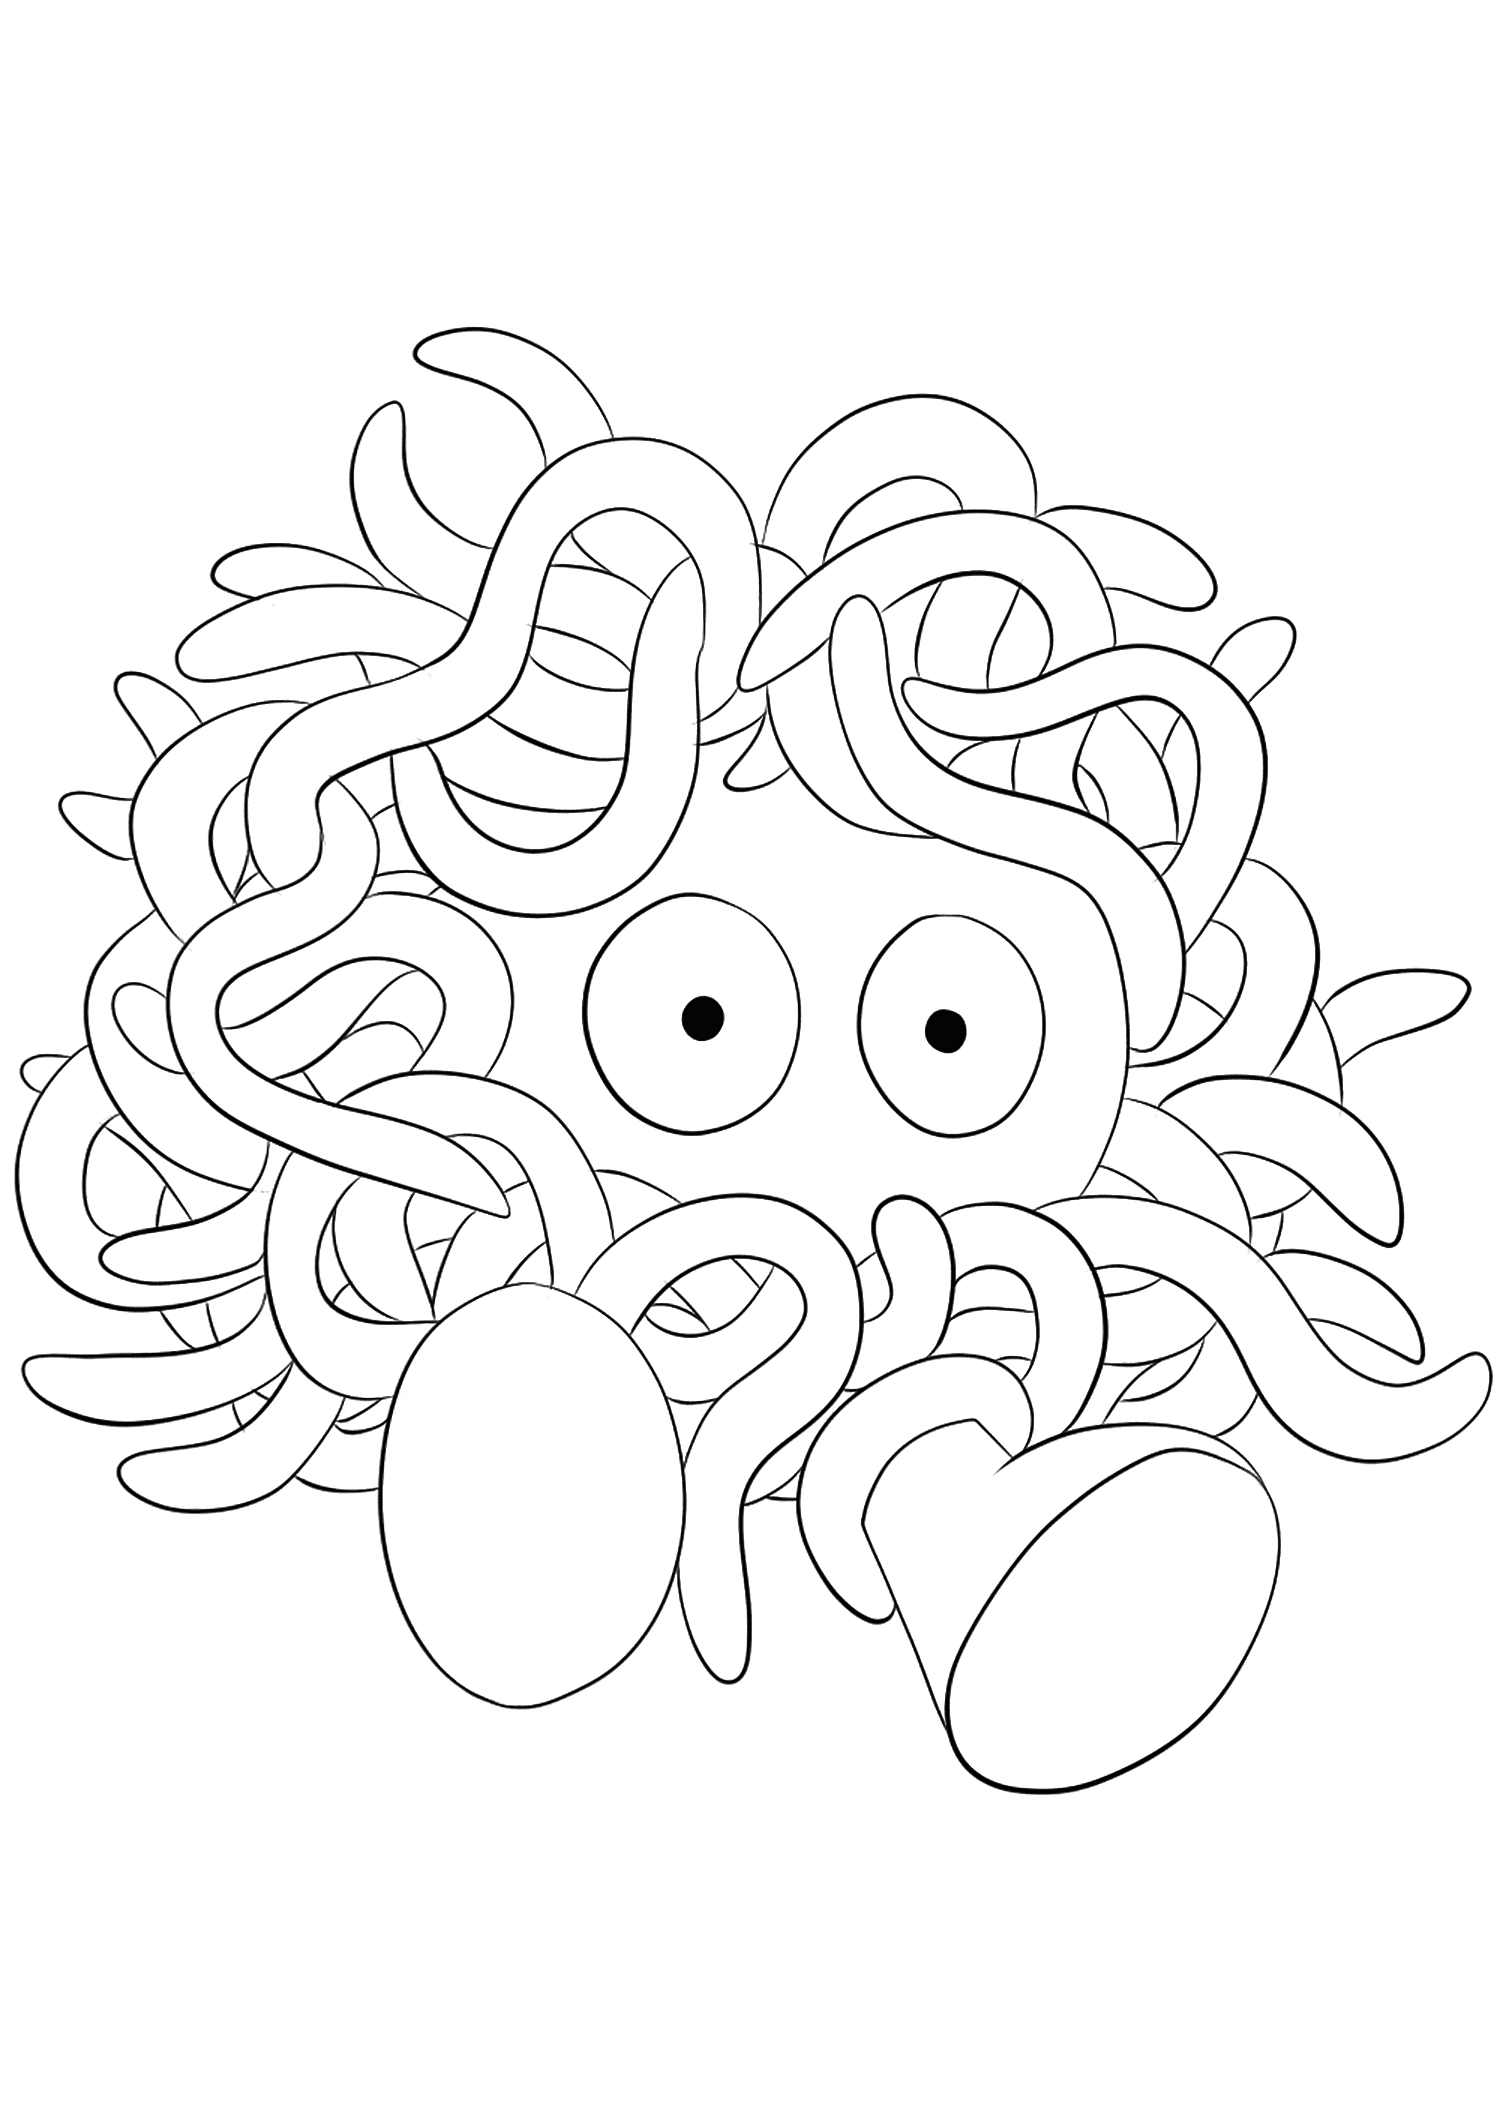 Tangela (No.114). Tangela Coloring page, Generation I Pokemon of type GrassOriginal image credit: Pokemon linearts by Lilly Gerbil on Deviantart.Permission:  All rights reserved © Pokemon company and Ken Sugimori.